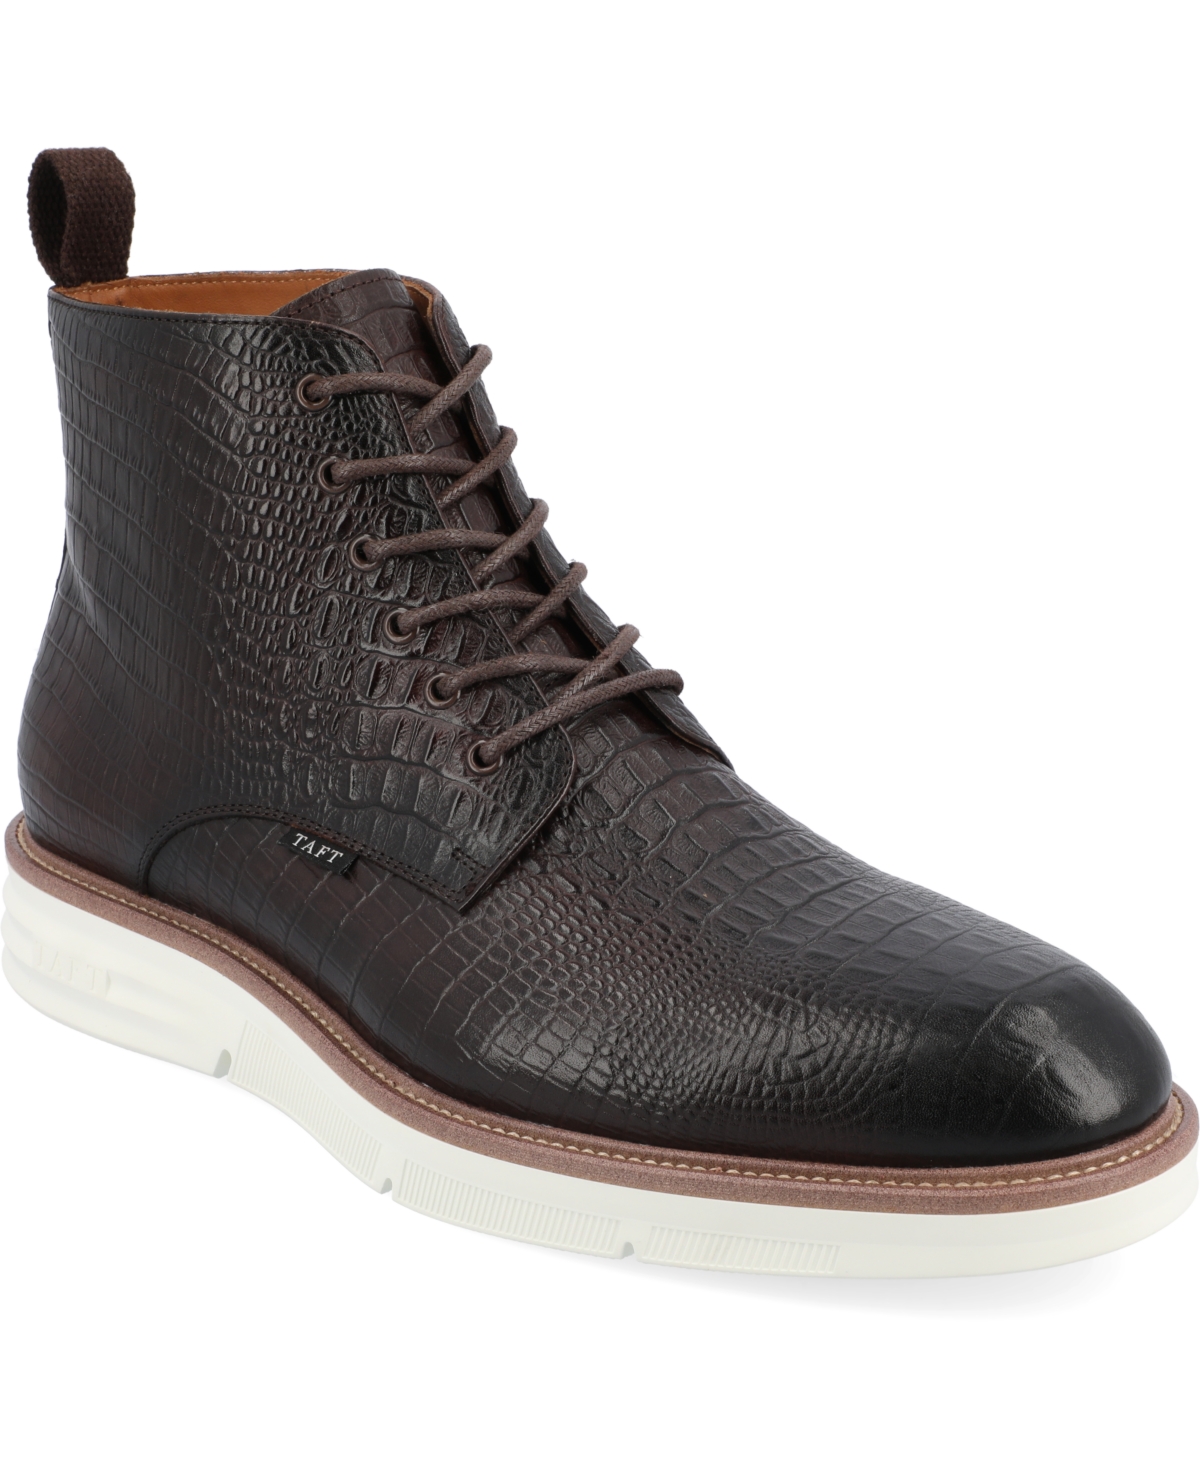 Taft 365 Men's Model 009 Plain-toe Lace-up Boots In Chocolate